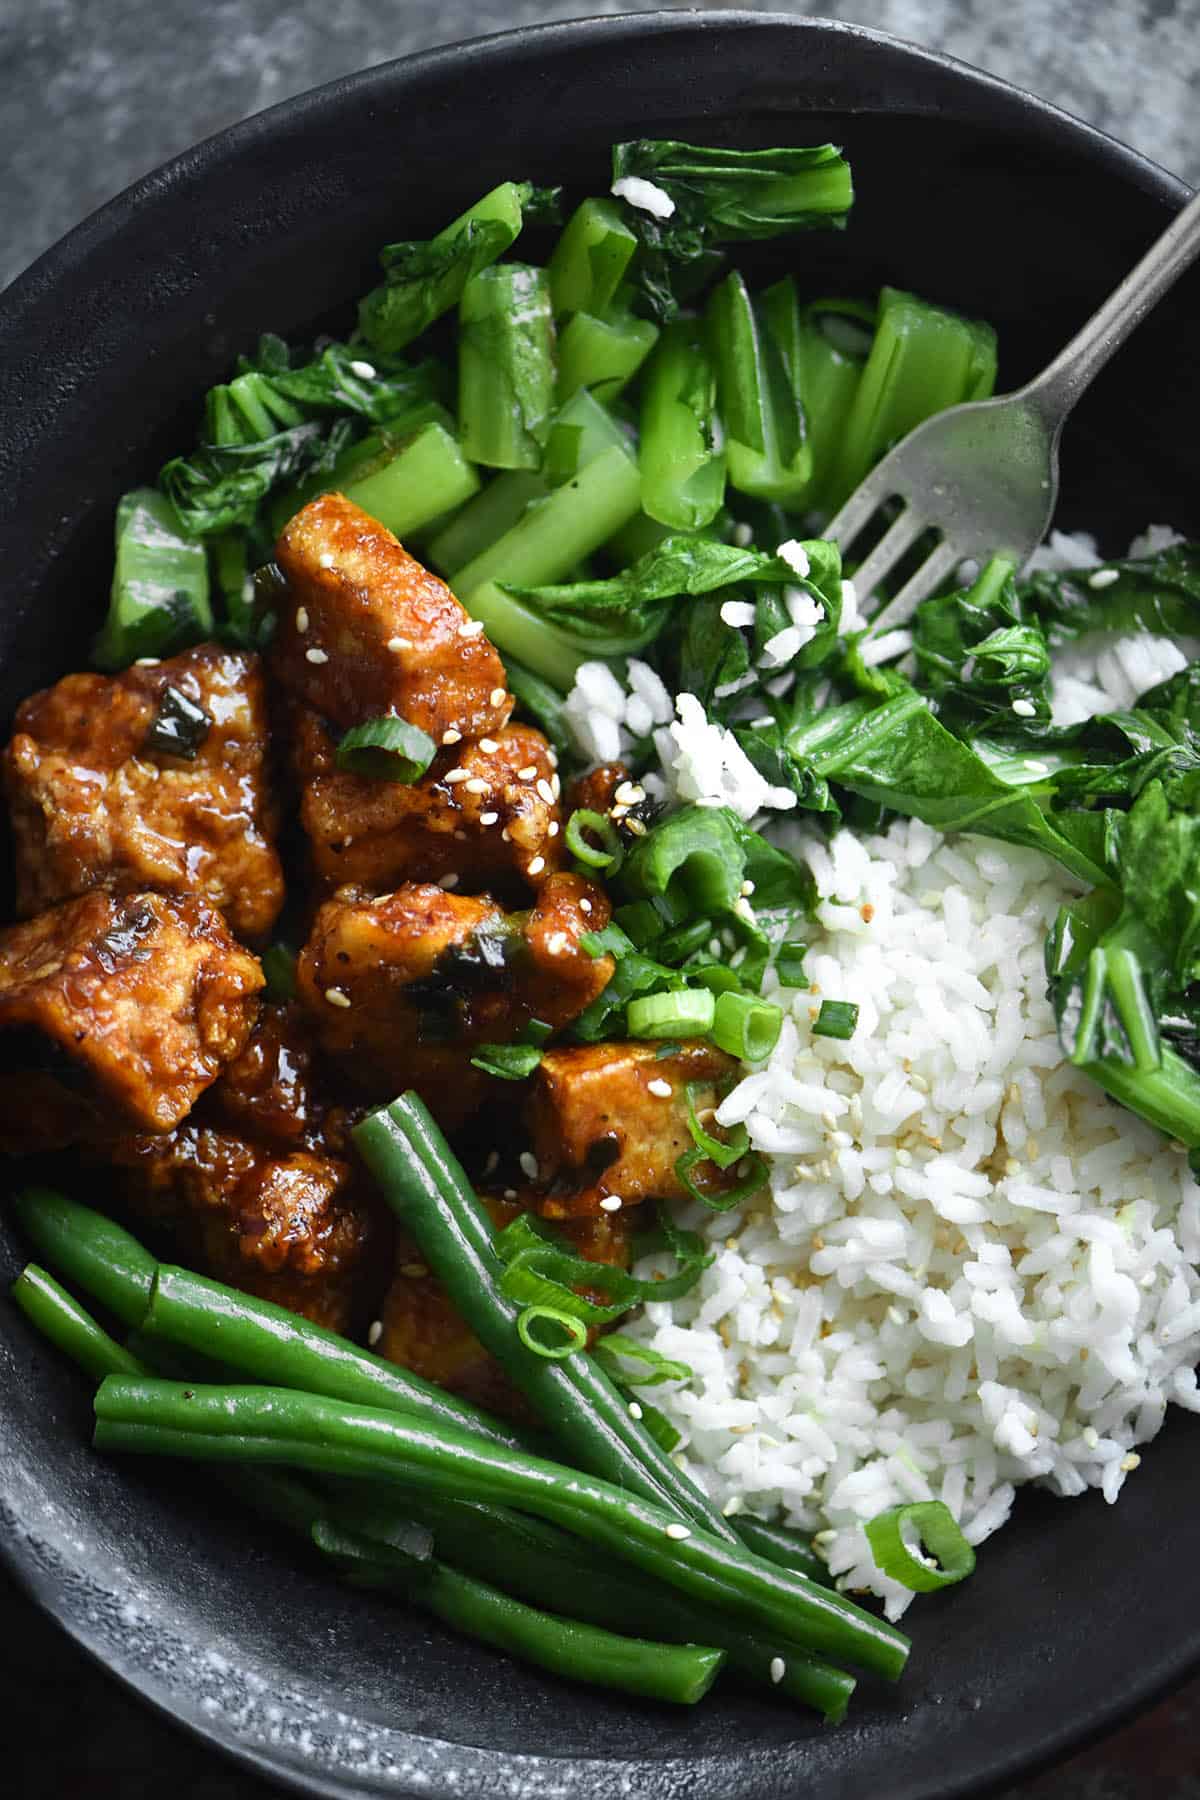 A close up aerial view of a bowl of sweet and sticky ginger tofu with ginger sesame rice and Asian greens. The meal sits in a dark blue ceramic bowl against a mottled navy coloured backdrop